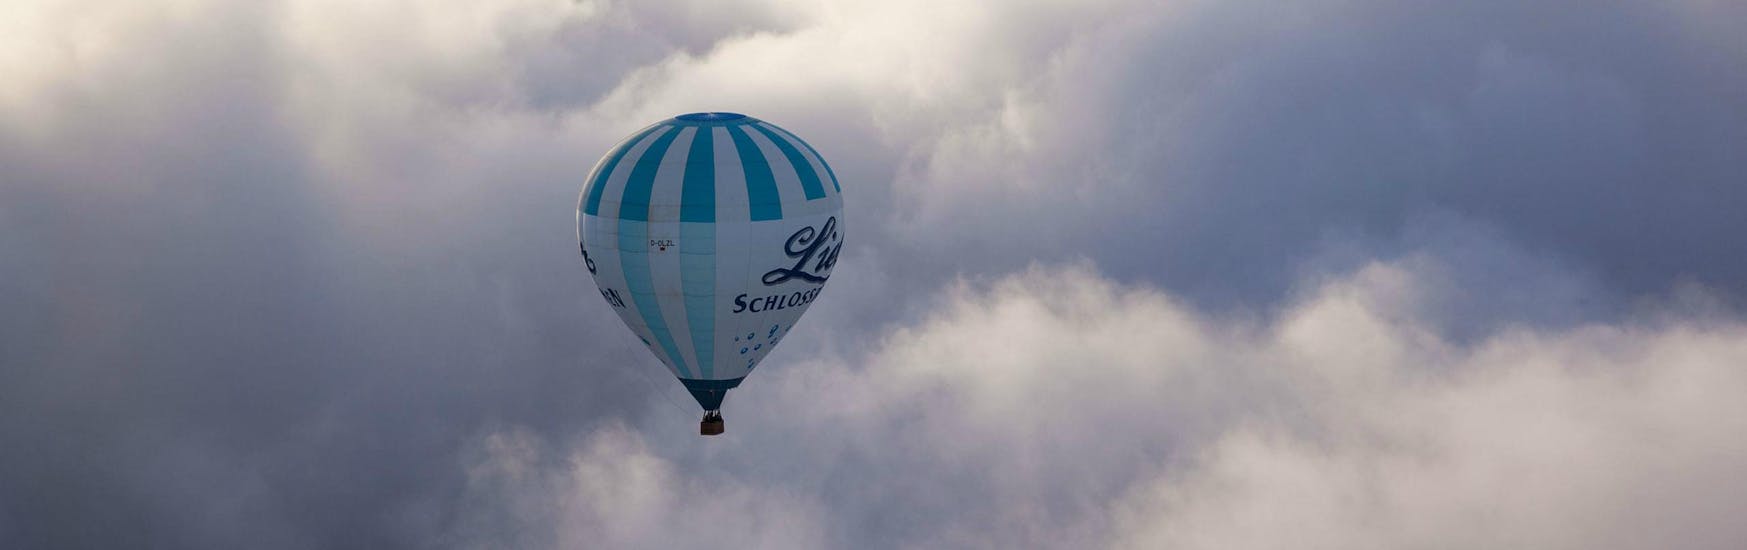 Picture of the balloon used for the Balloon Ride "Engagement & Wedding" - Southern Baden